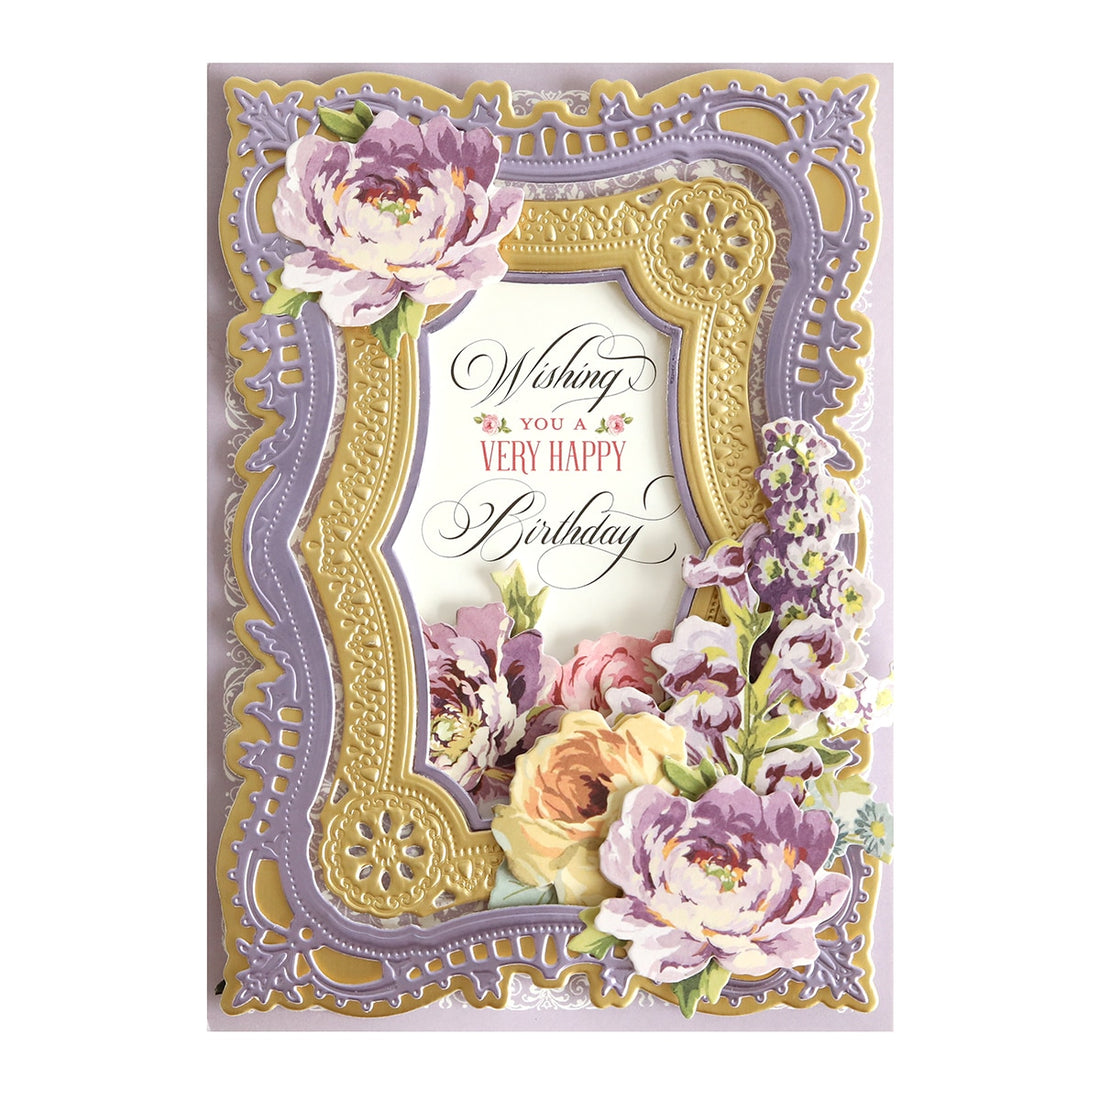 A purple and gold card with flowers and a frame.